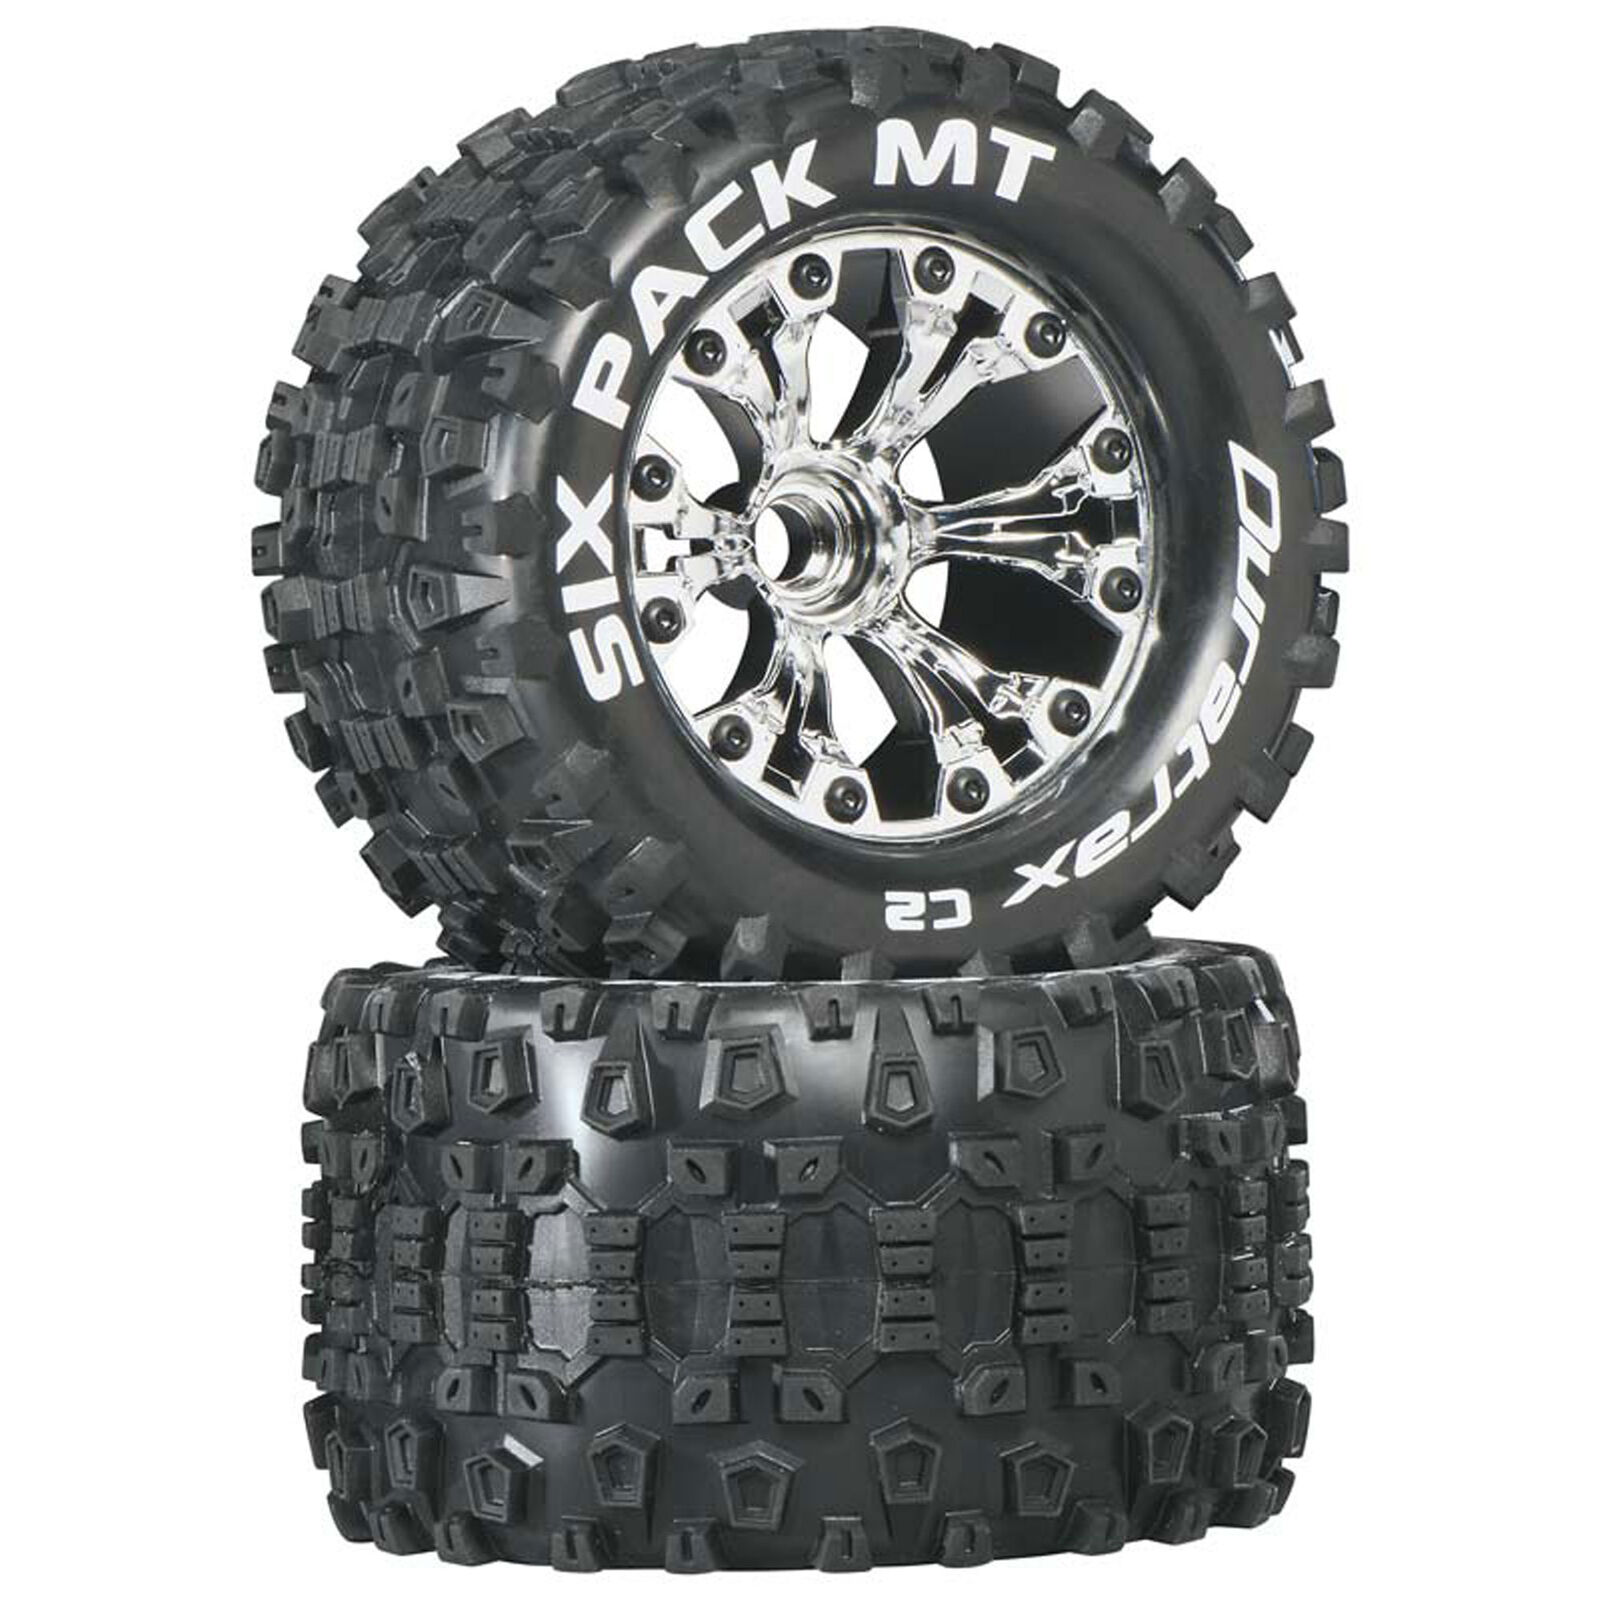 Six-Pack MT 2.8" 2WD Mounted Front C2 Tires, Chrome (2)